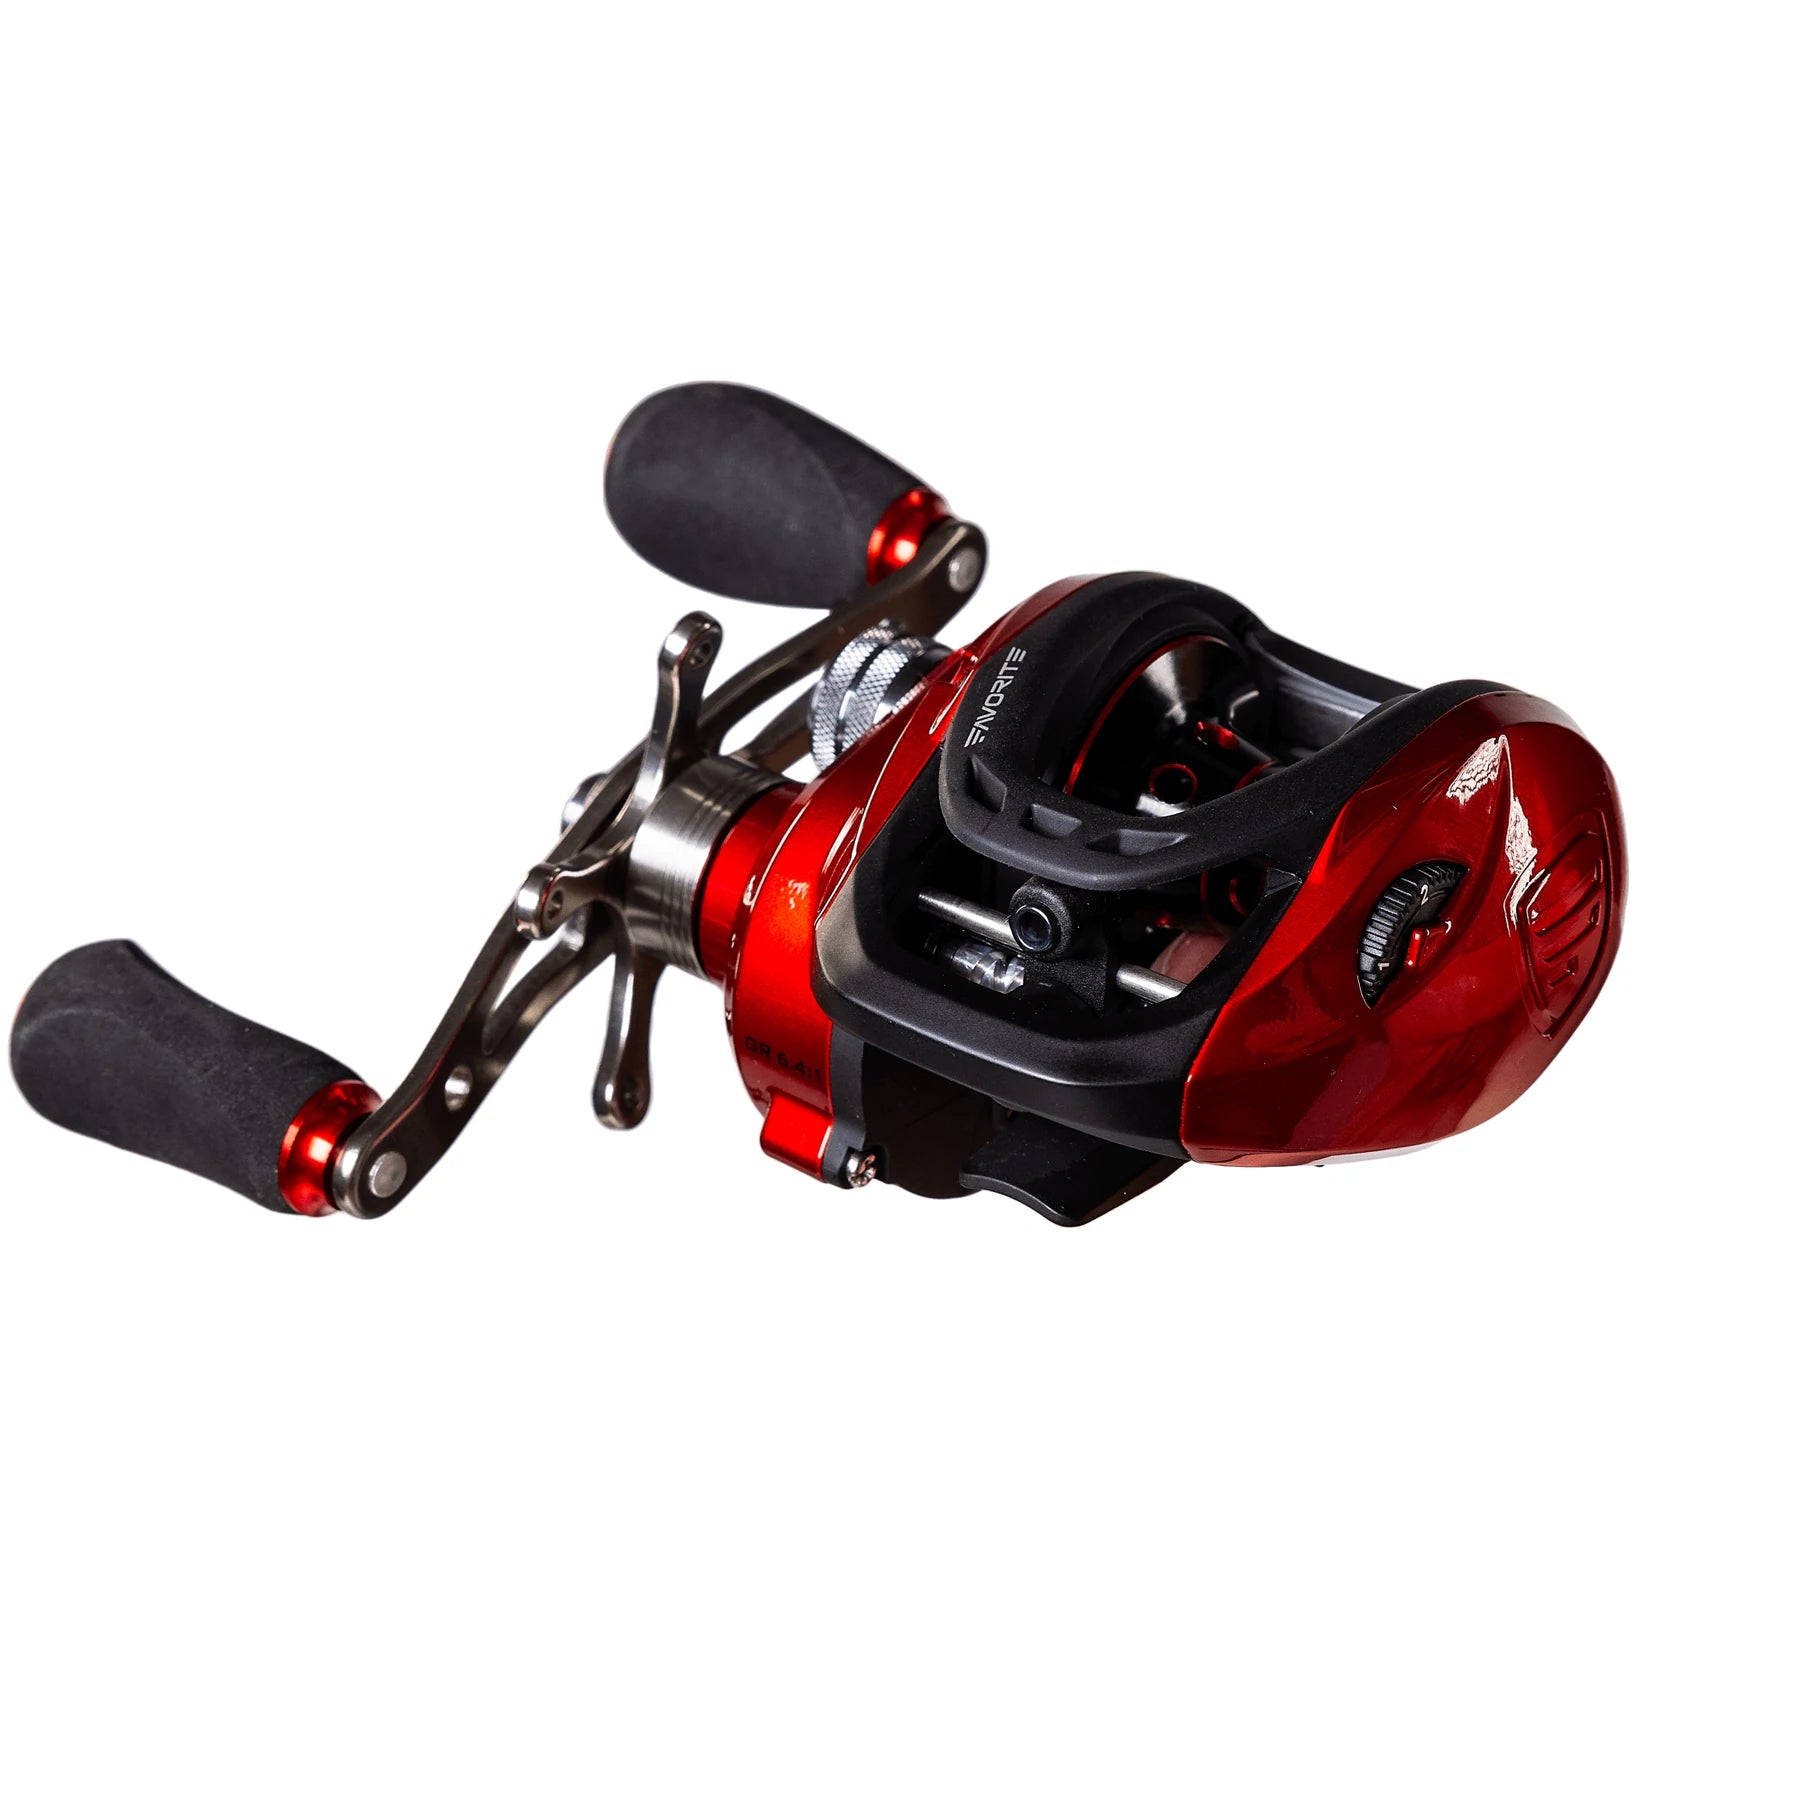 Favorite Fishing Absolute Casting Reel with Free S&H — CampSaver